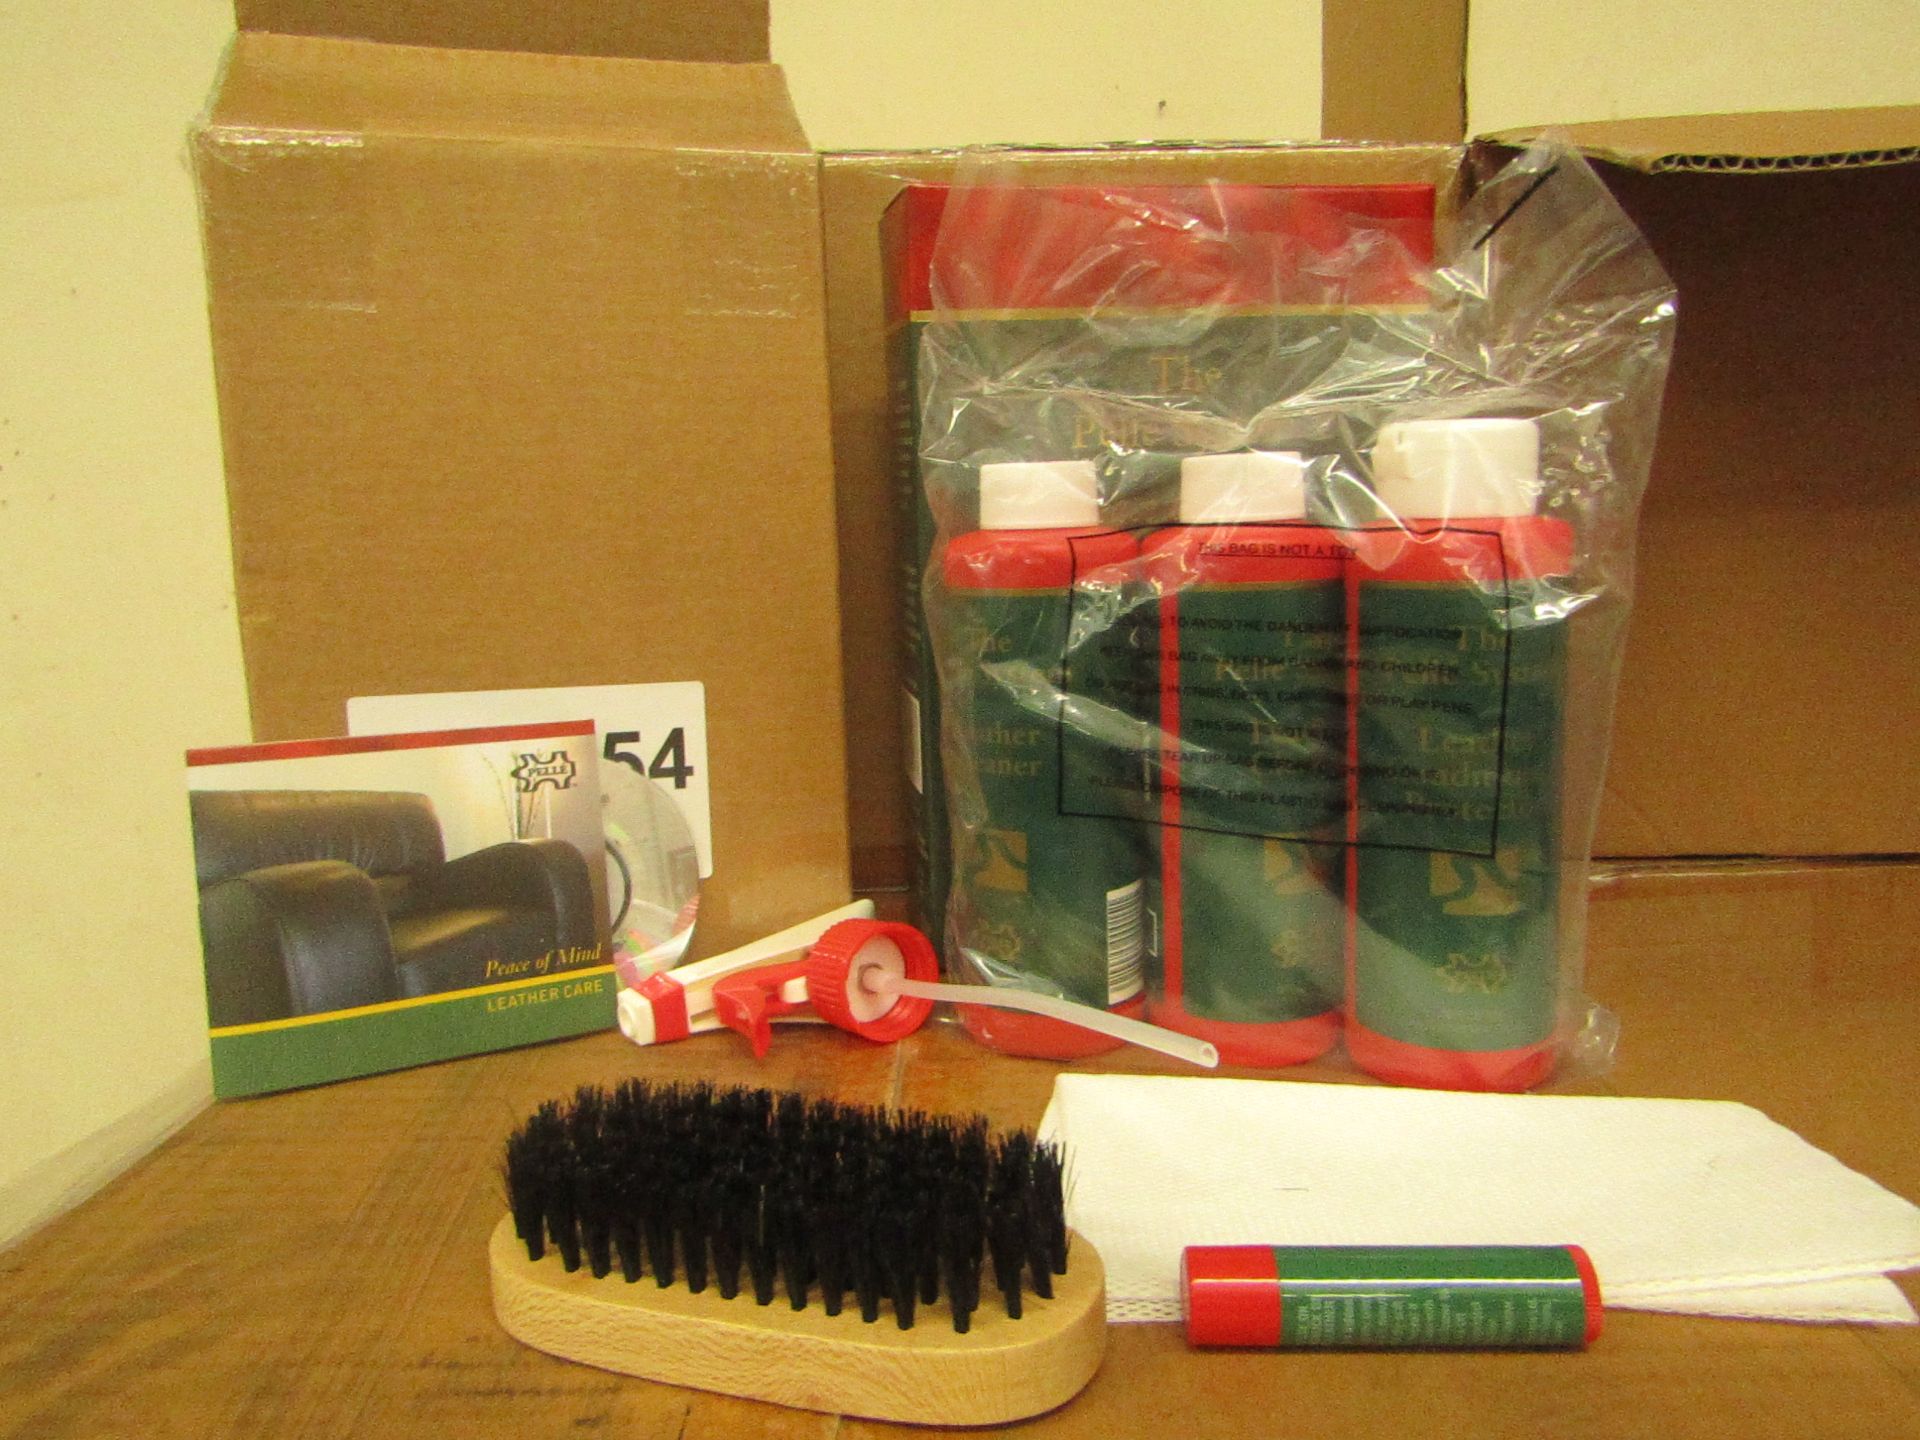 The Pelle System Leather Cleaner sets.Includes Brush, Ink remover,cleaner & Conditioner. New &